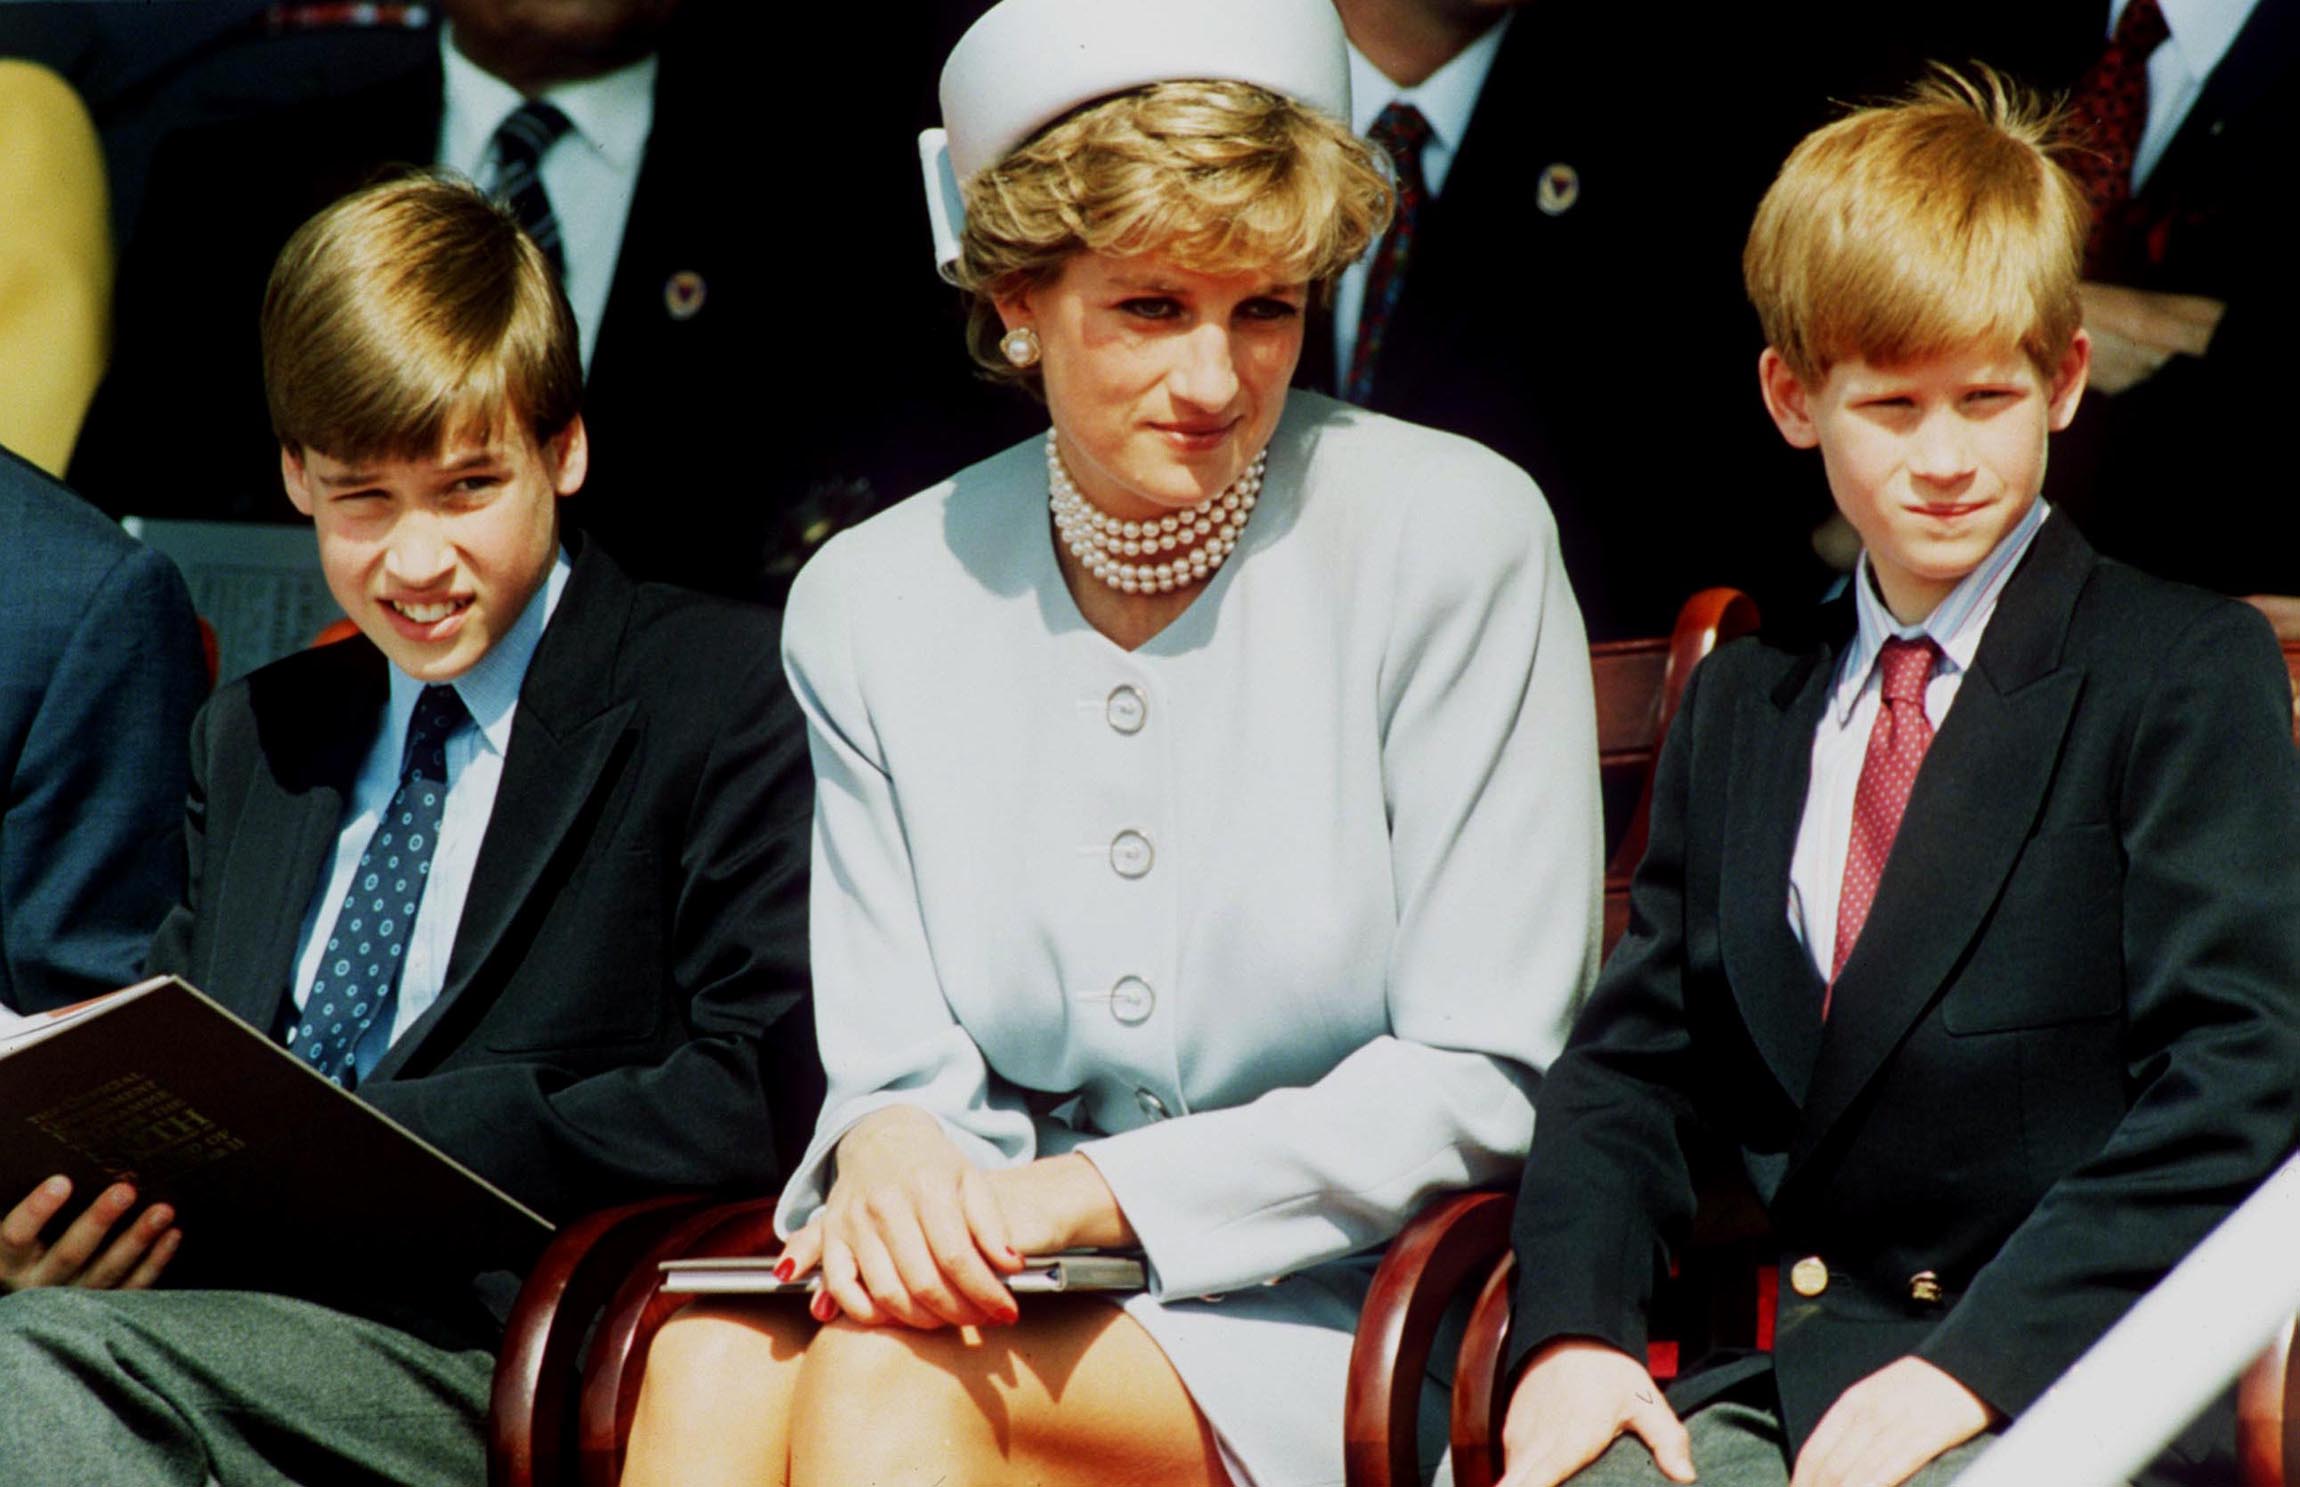 Princess Diana sitting in between her sons Prince William and Prince Harry during a Remembrance service in 1995